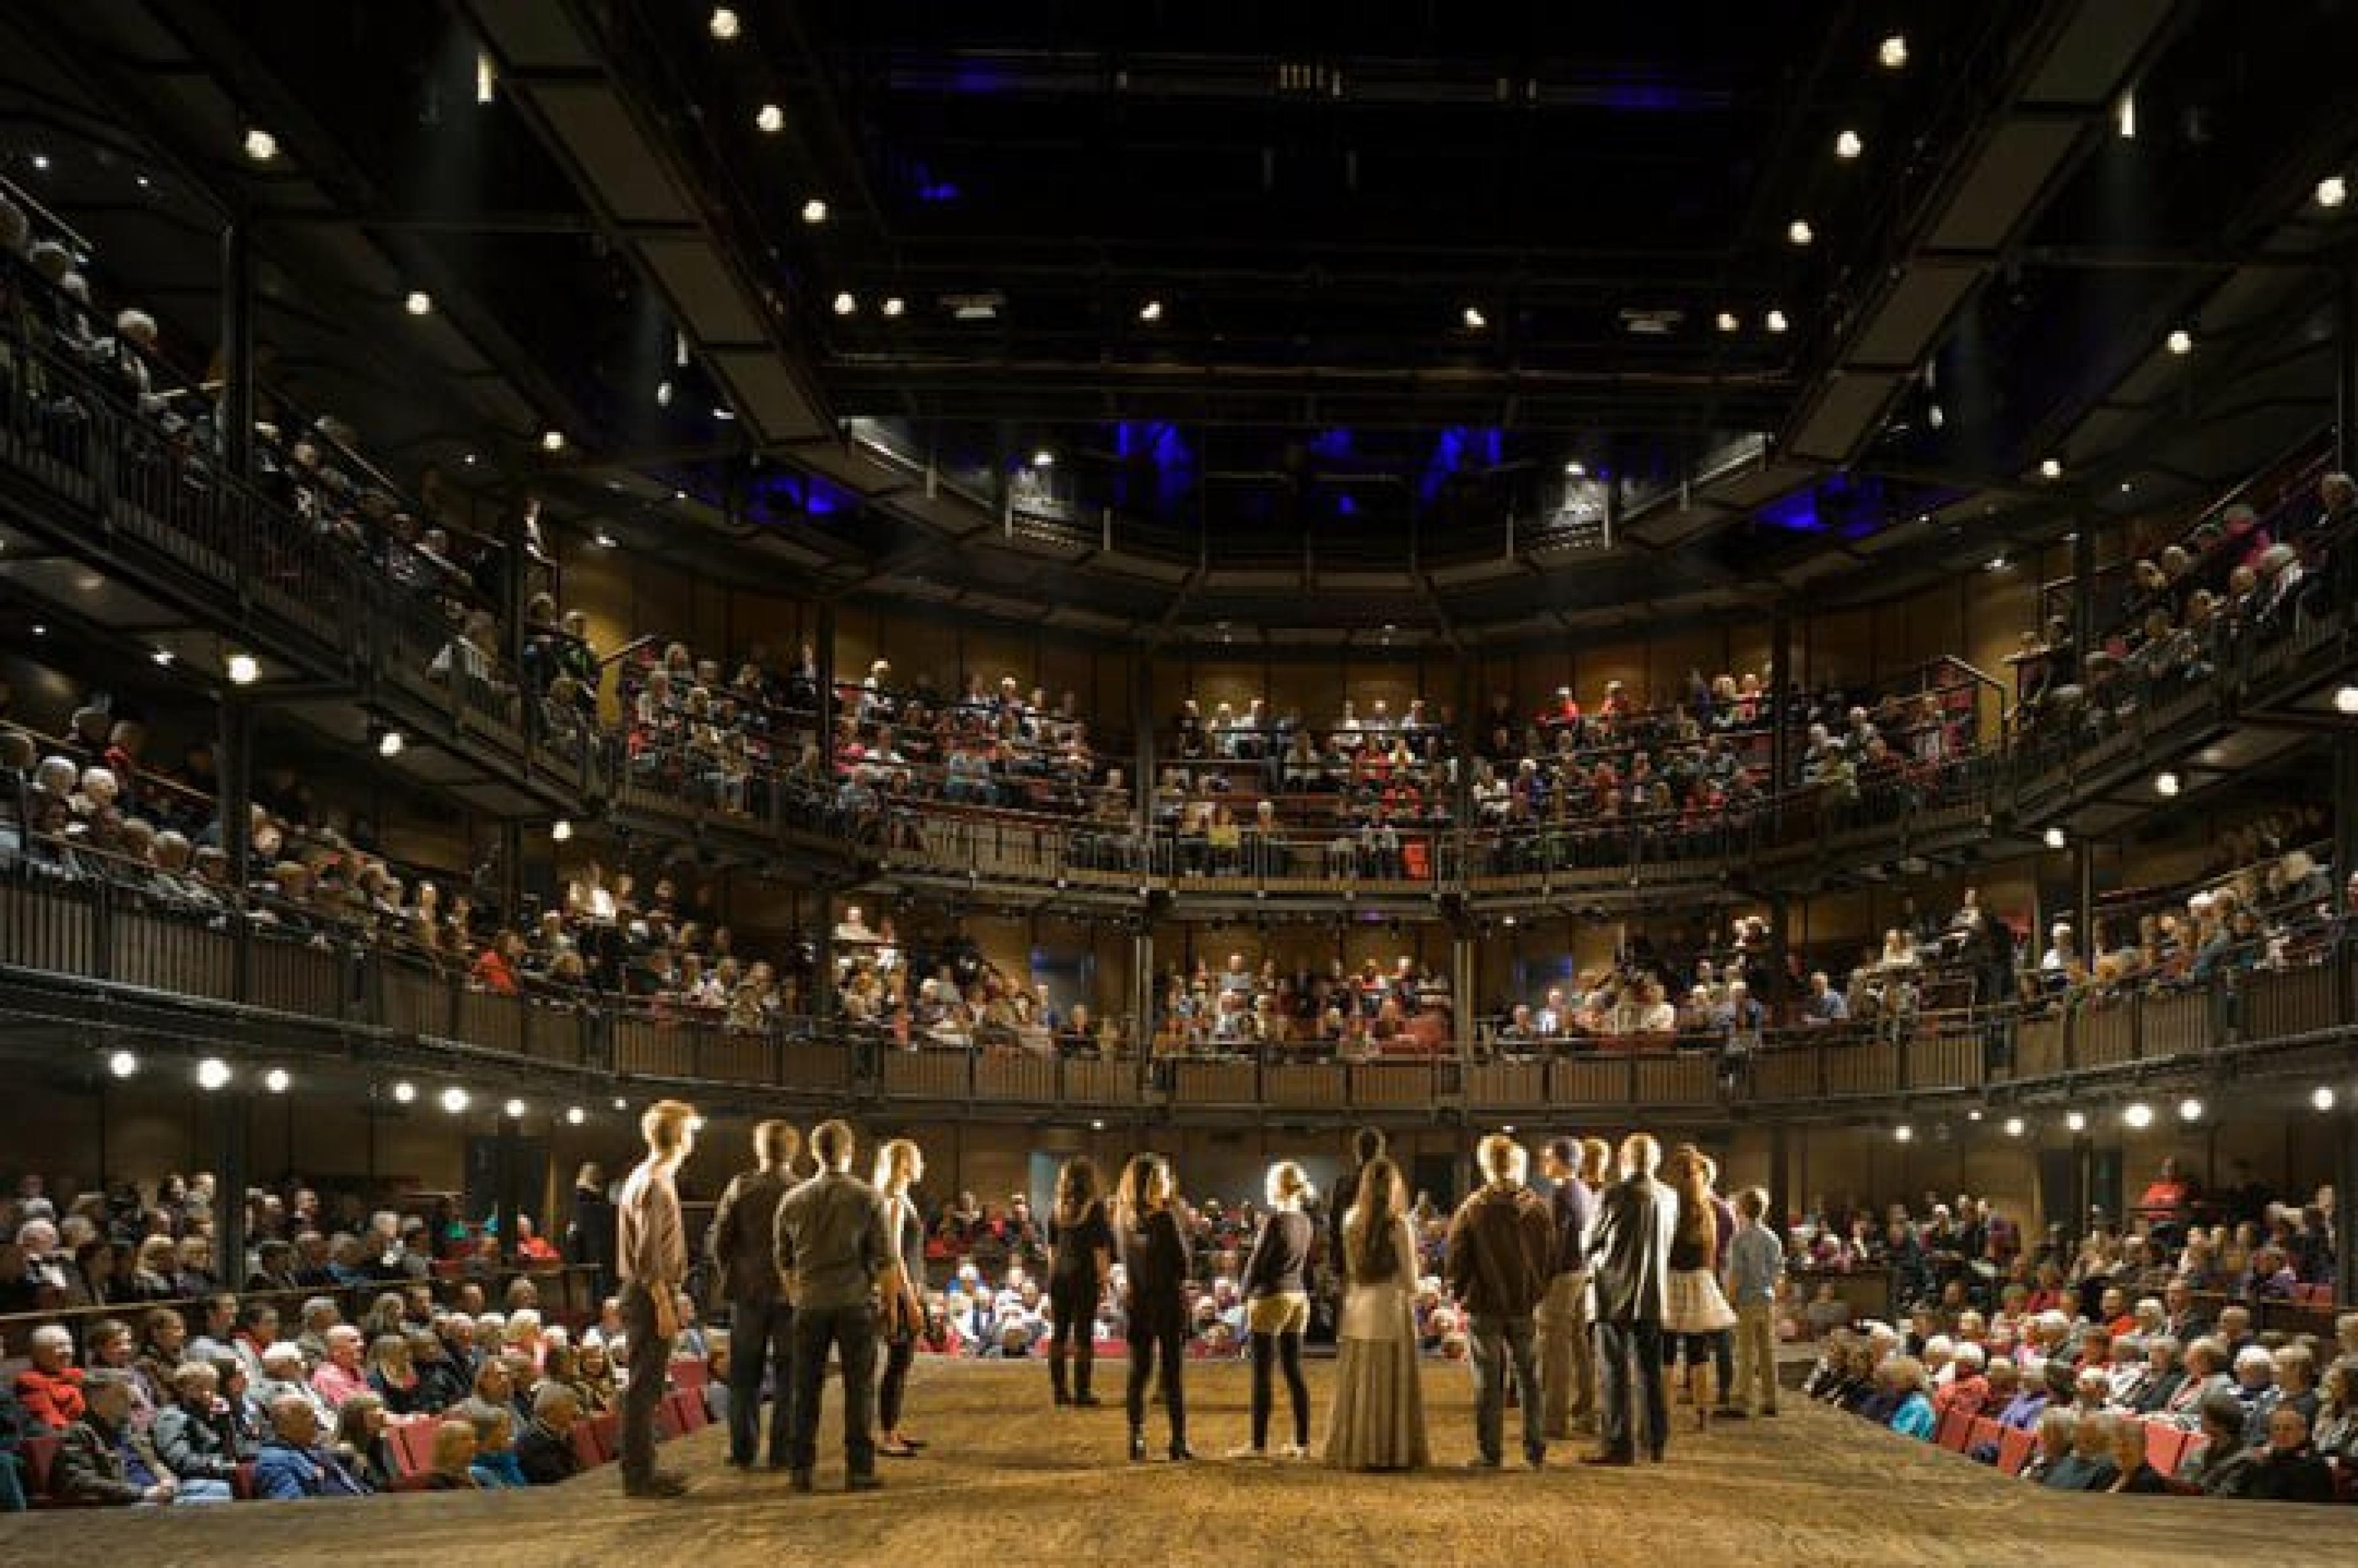 Auditorium At Royal Shakespeare Company,Cotswolds, England - Copyright Peter Cook